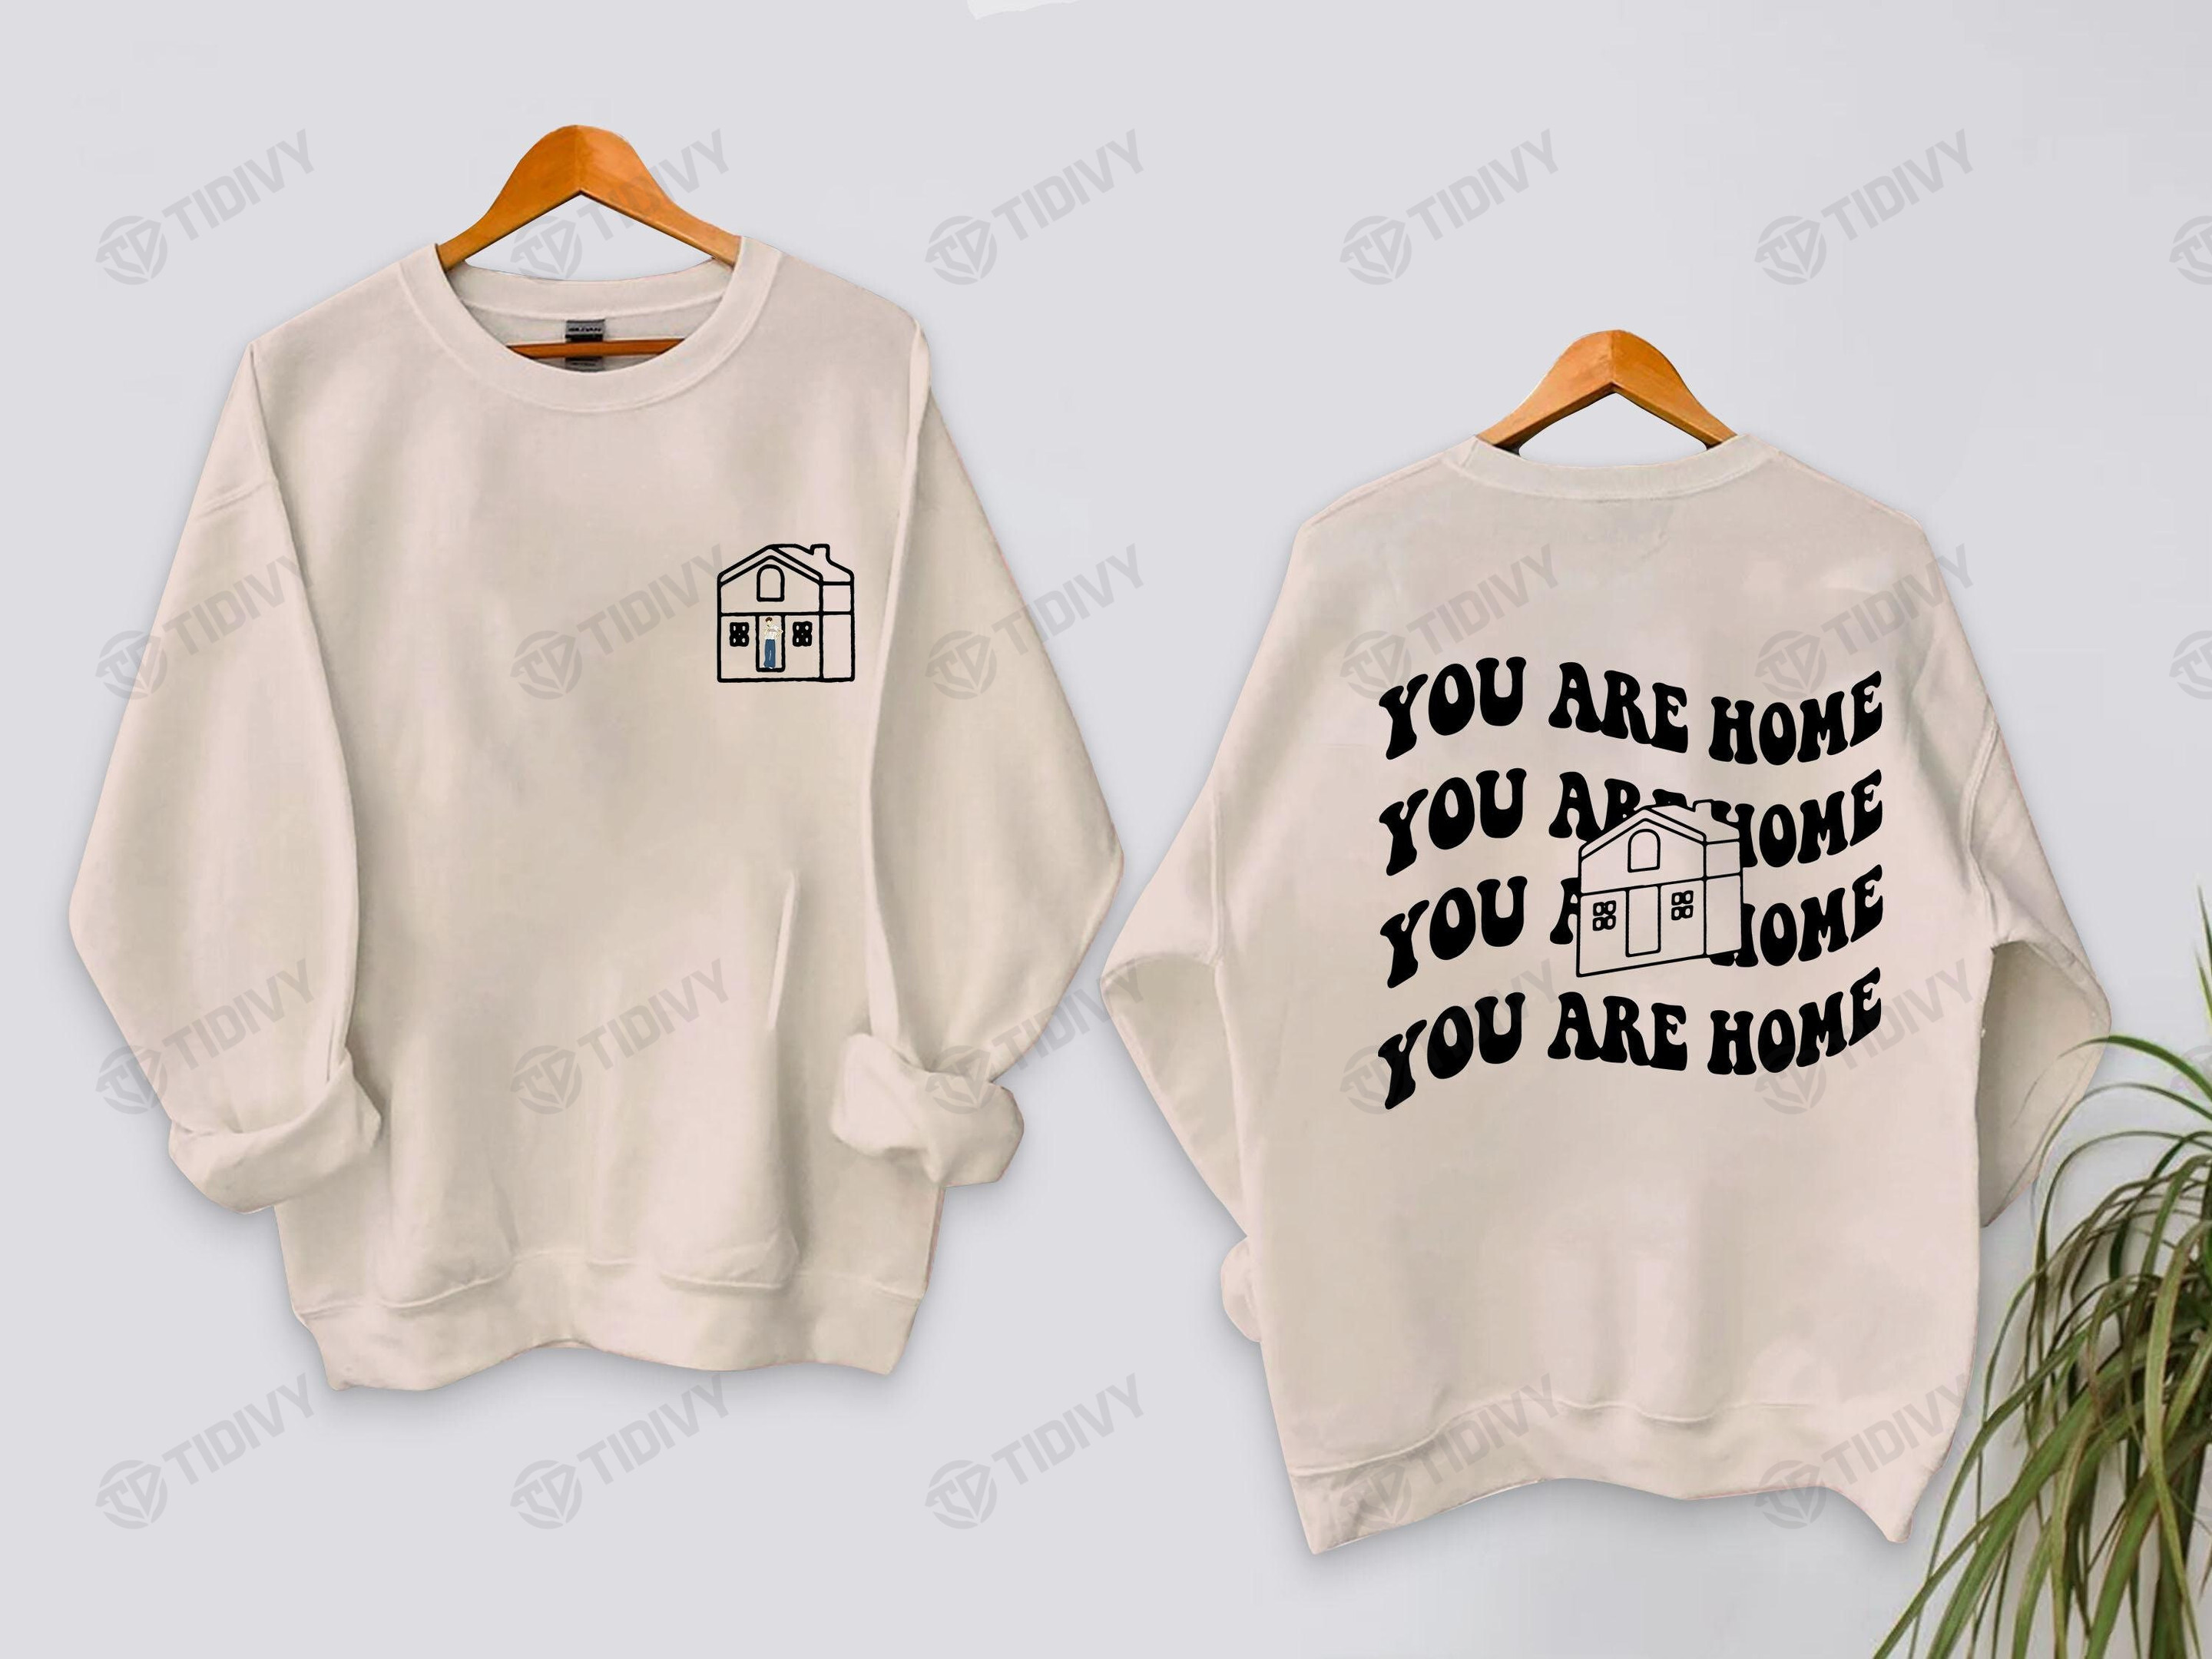 Harry Styles Harry's House Album You Are Home Two Sided Graphic Unisex T Shirt, Sweatshirt, Hoodie Size S - 5XL